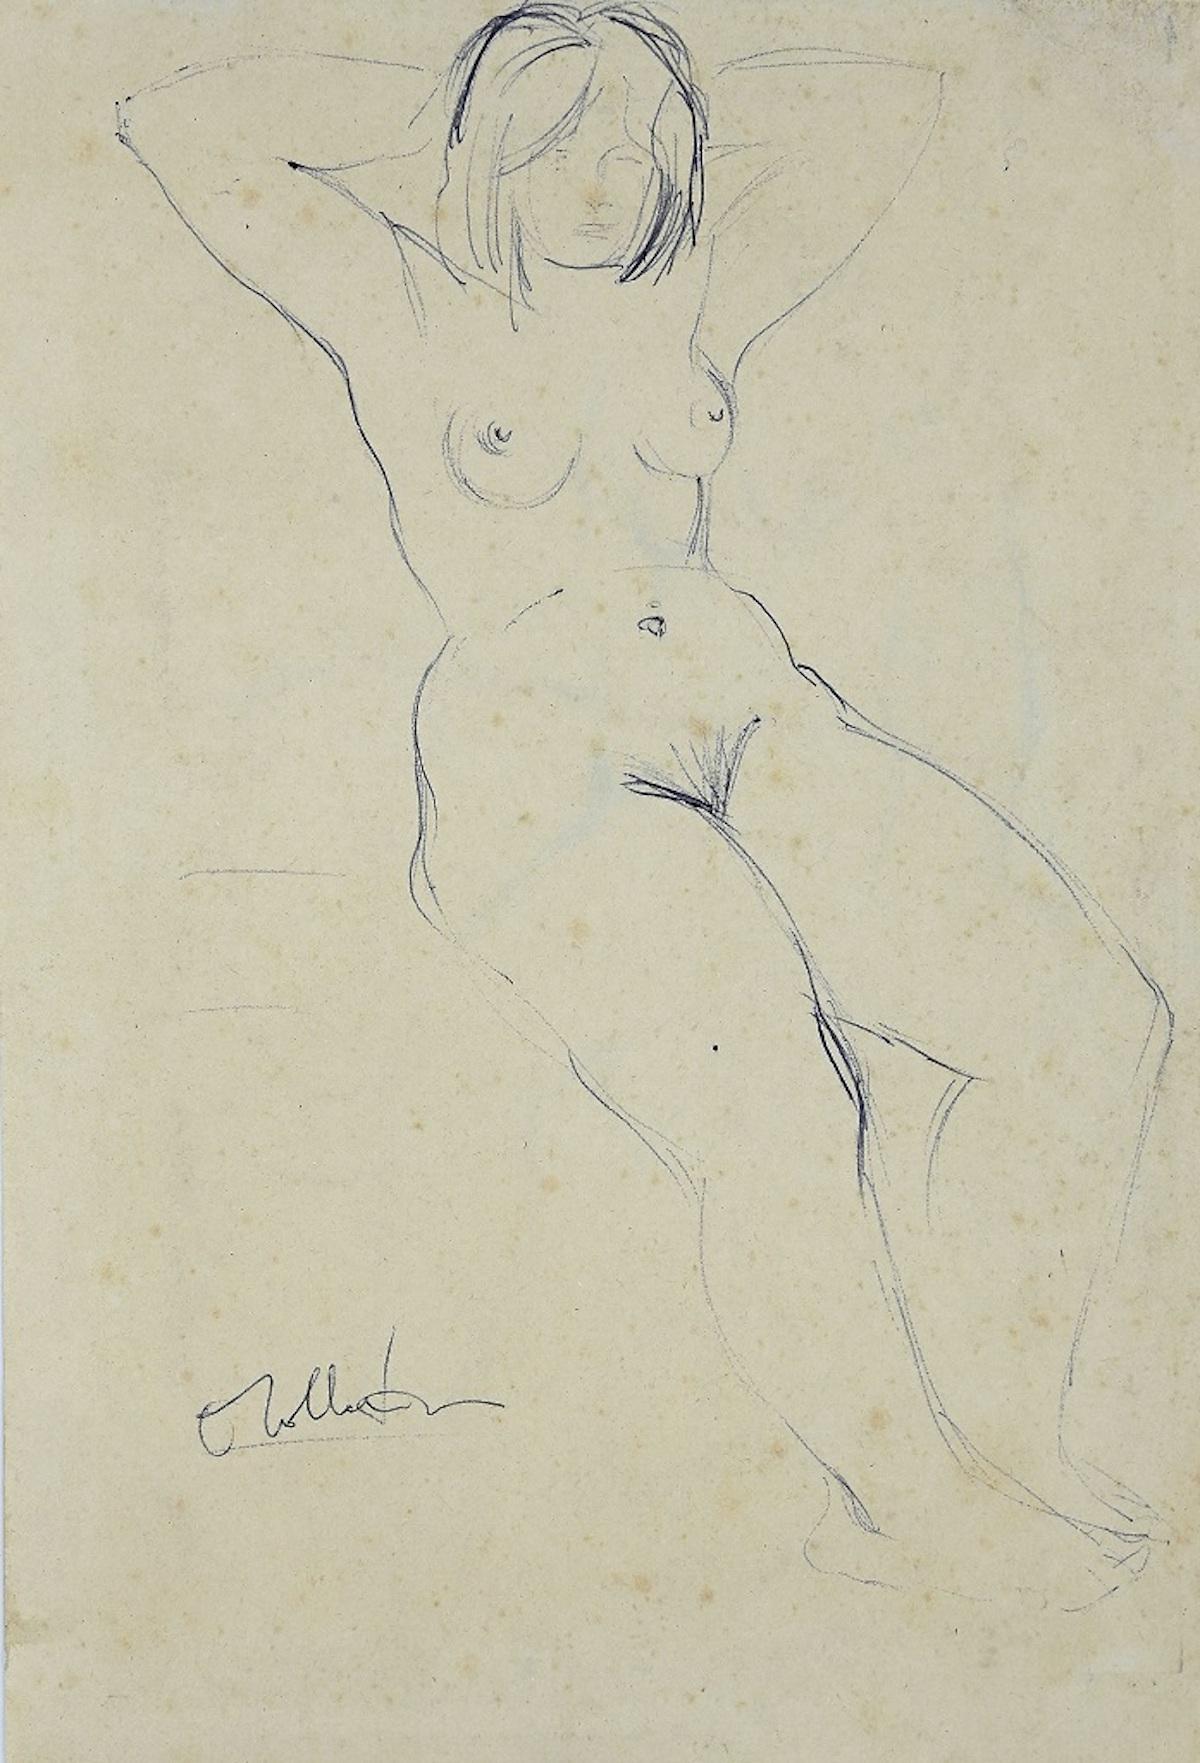 Nude Female is an original pen drawing realized by Angelo Sabbatani (1922-1974).

The artwork is in good conditions on a yellowed paper.

Hand-signed by the artist on the lower left corner.

Angelo Sabbatani had his first artistic training at the